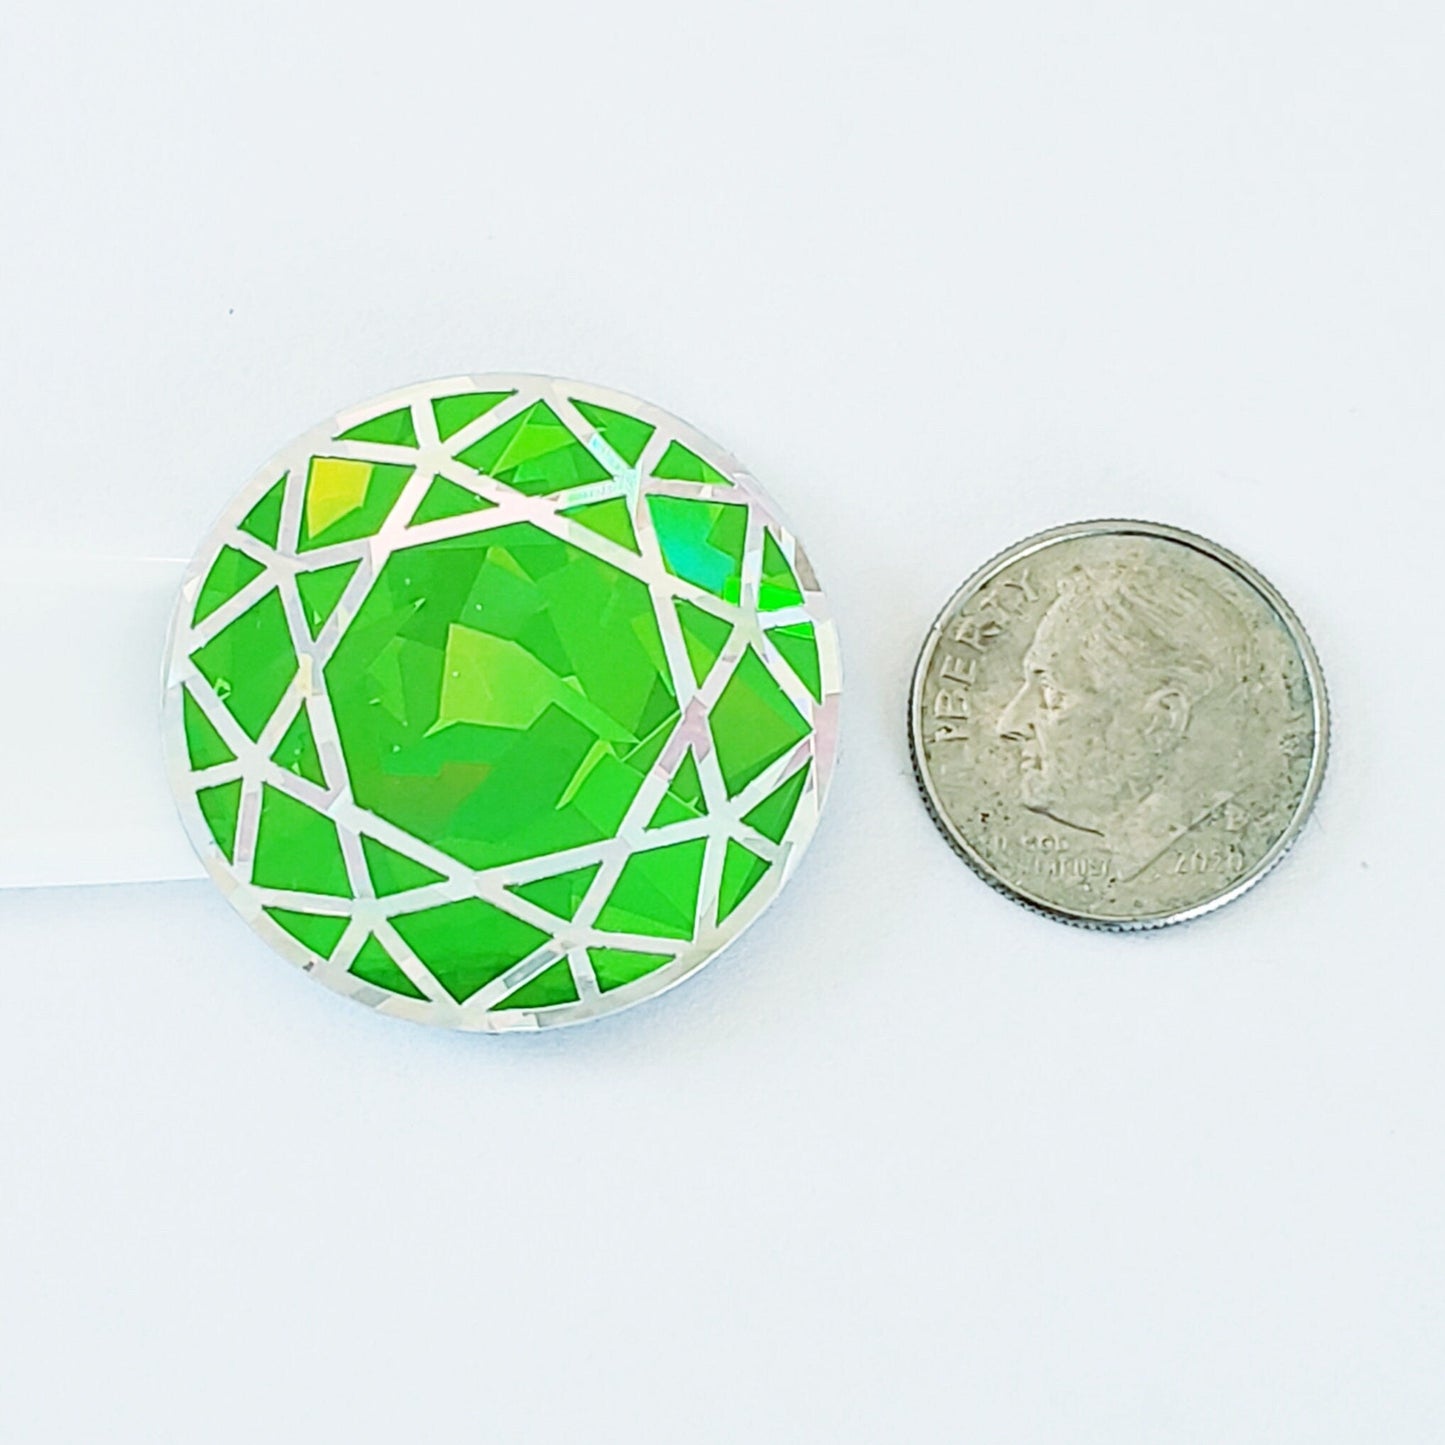 Green Crystal Stickers, set of 20 sparkly green peridot gems, round diamond stickers for August birthday, Virgo zodiac gift, Free shipping.